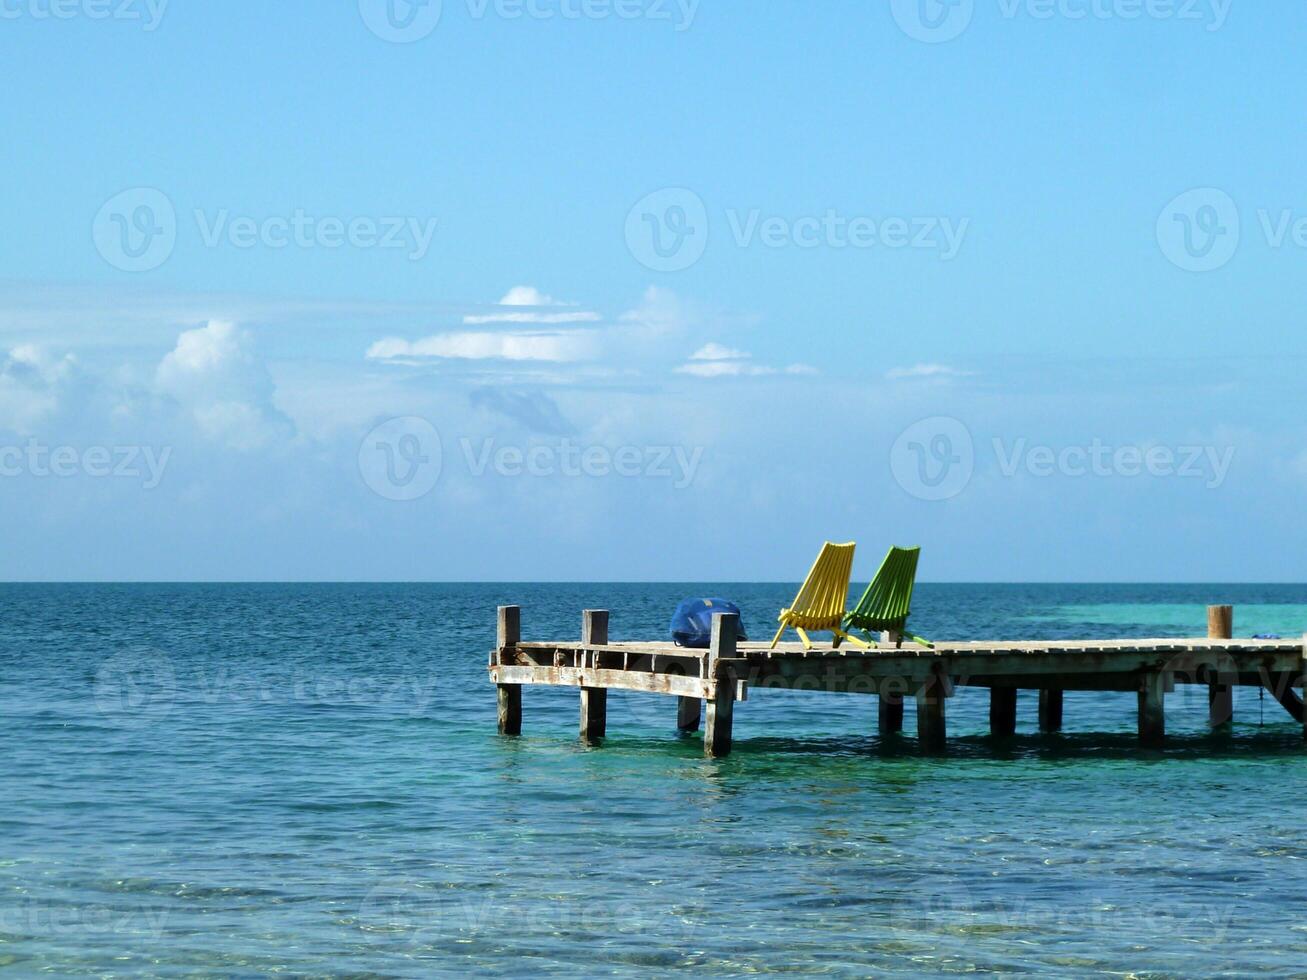 Belize Cayes - Small tropical island at Barrier Reef with paradise beach - known for diving, snorkeling and relaxing vacations - Caribbean Sea, Belize, Central America photo